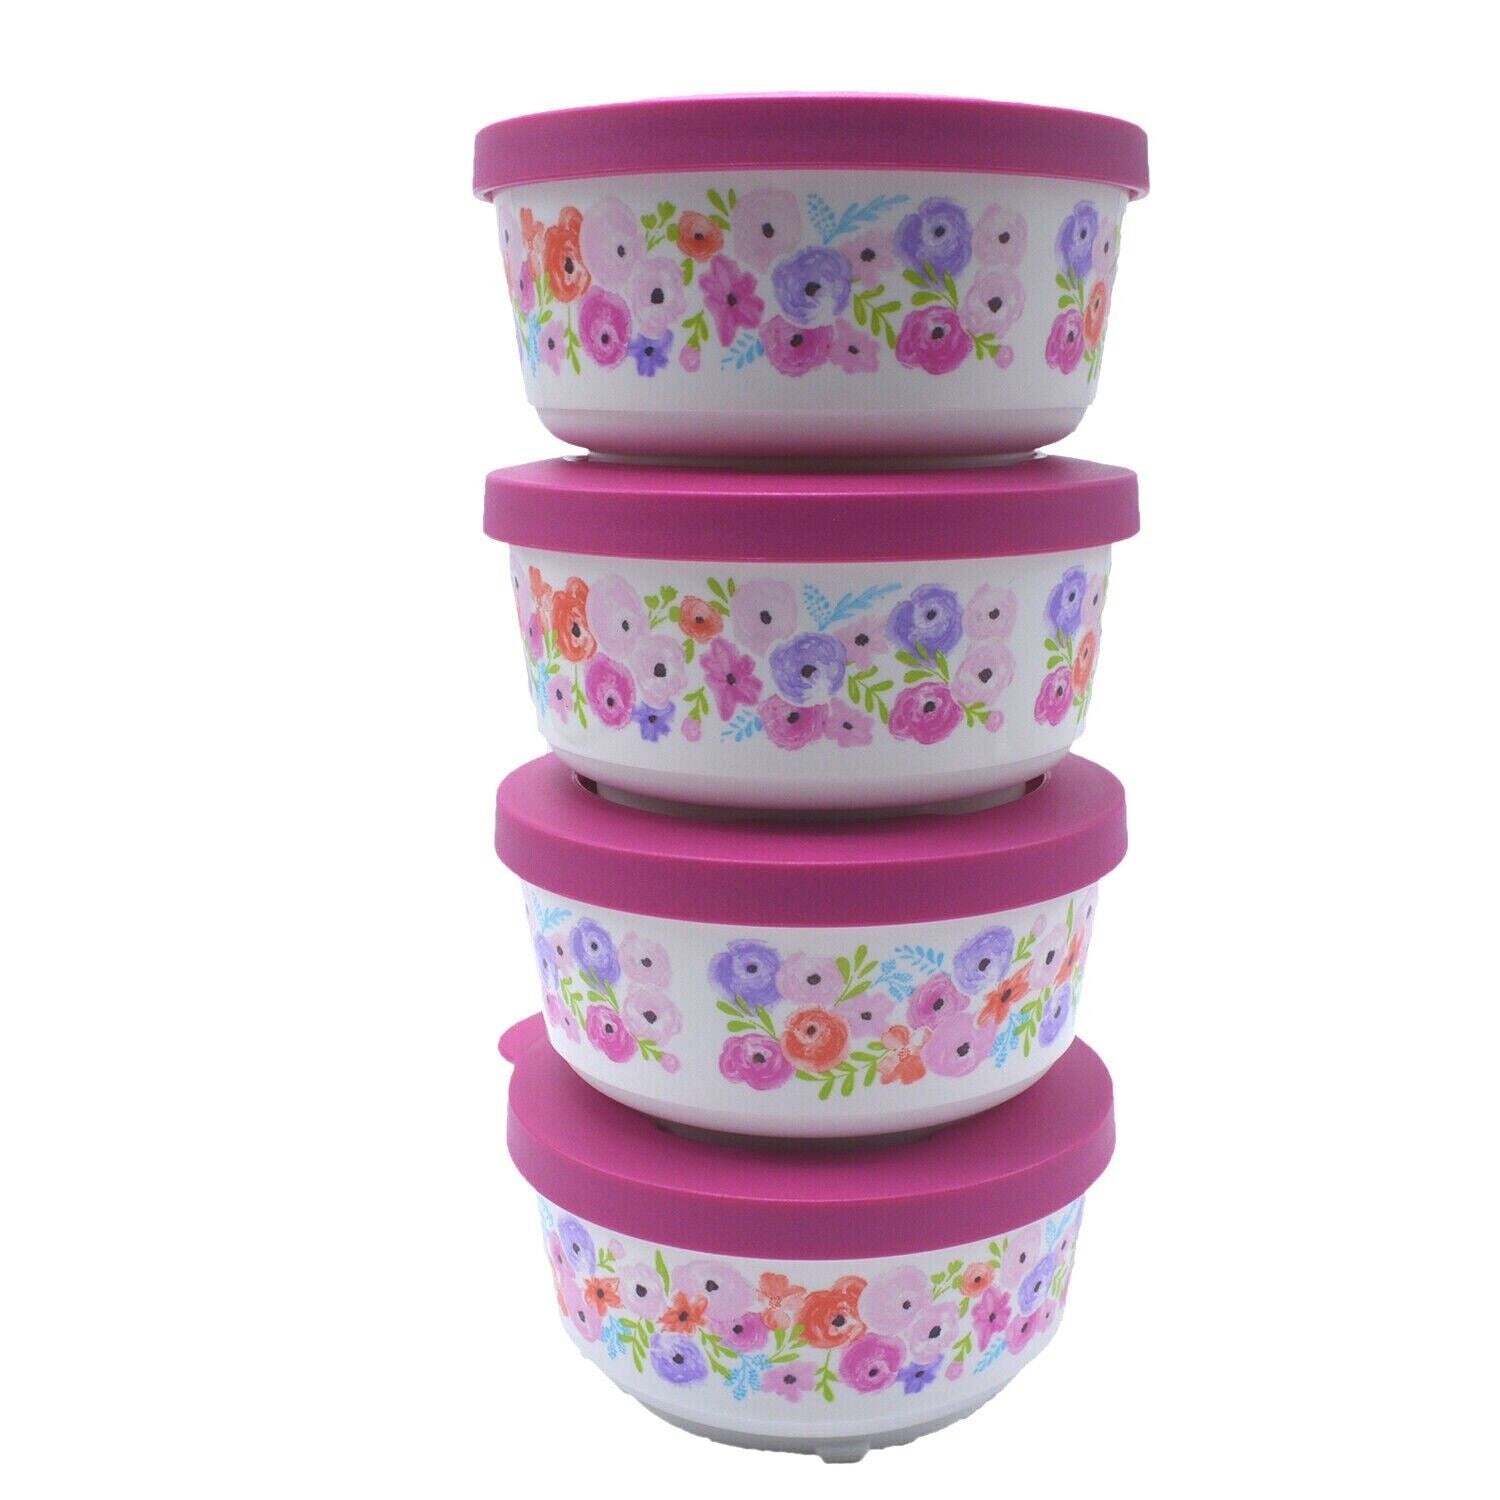 TUPPERWARE ART OF SPRING 4 ROUND SNACK BOWLS PINK SNAP-TOGETHER SEALS 6-oz NEW